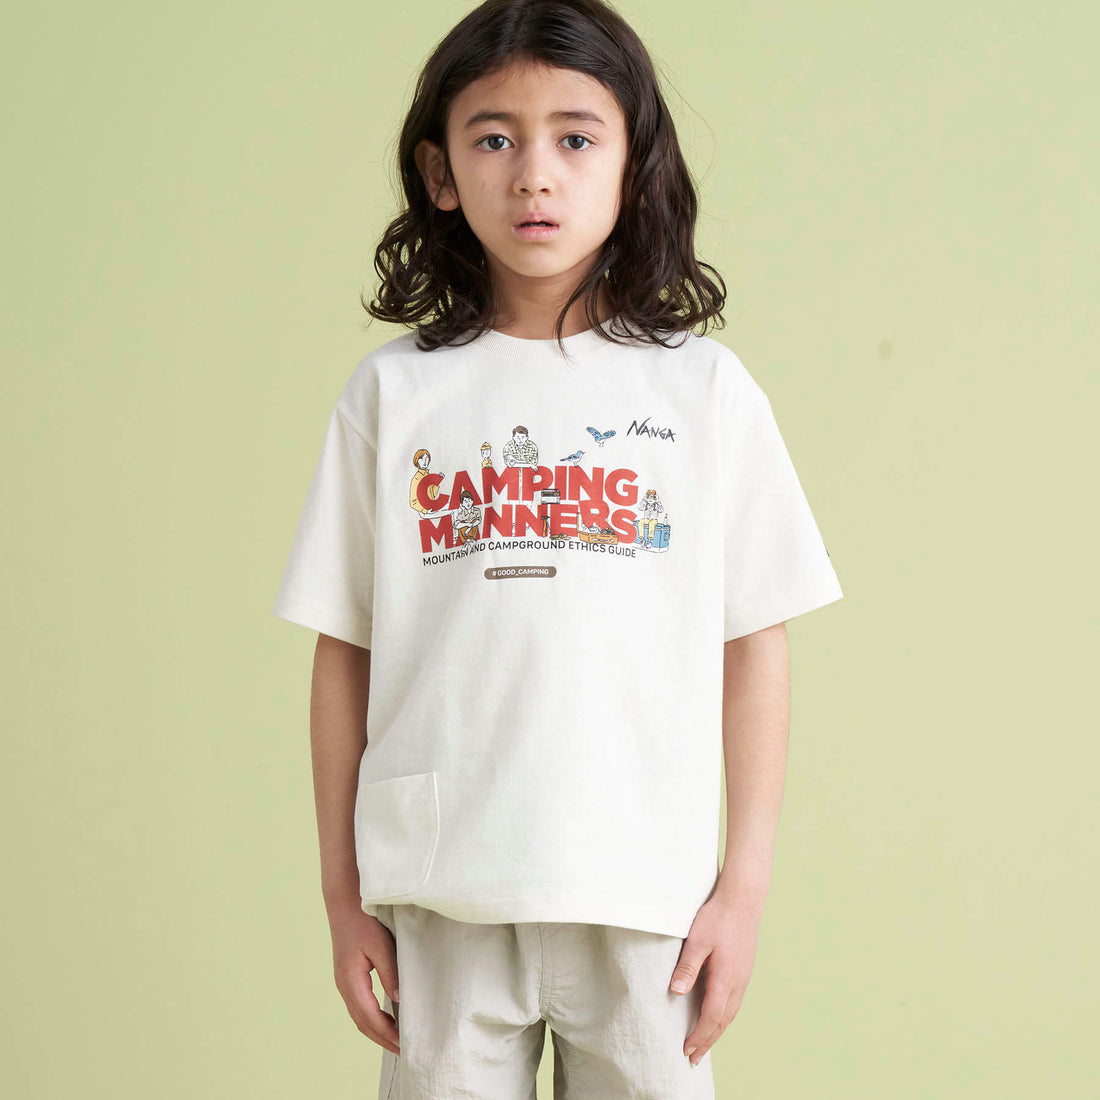 ECO HYBRID CAMPING MANNERS PEG&ROPE KIDS TEE / エコハイブリッド キャンピングマナー ペグ&ロープ キッズキッズティー(キッズ)